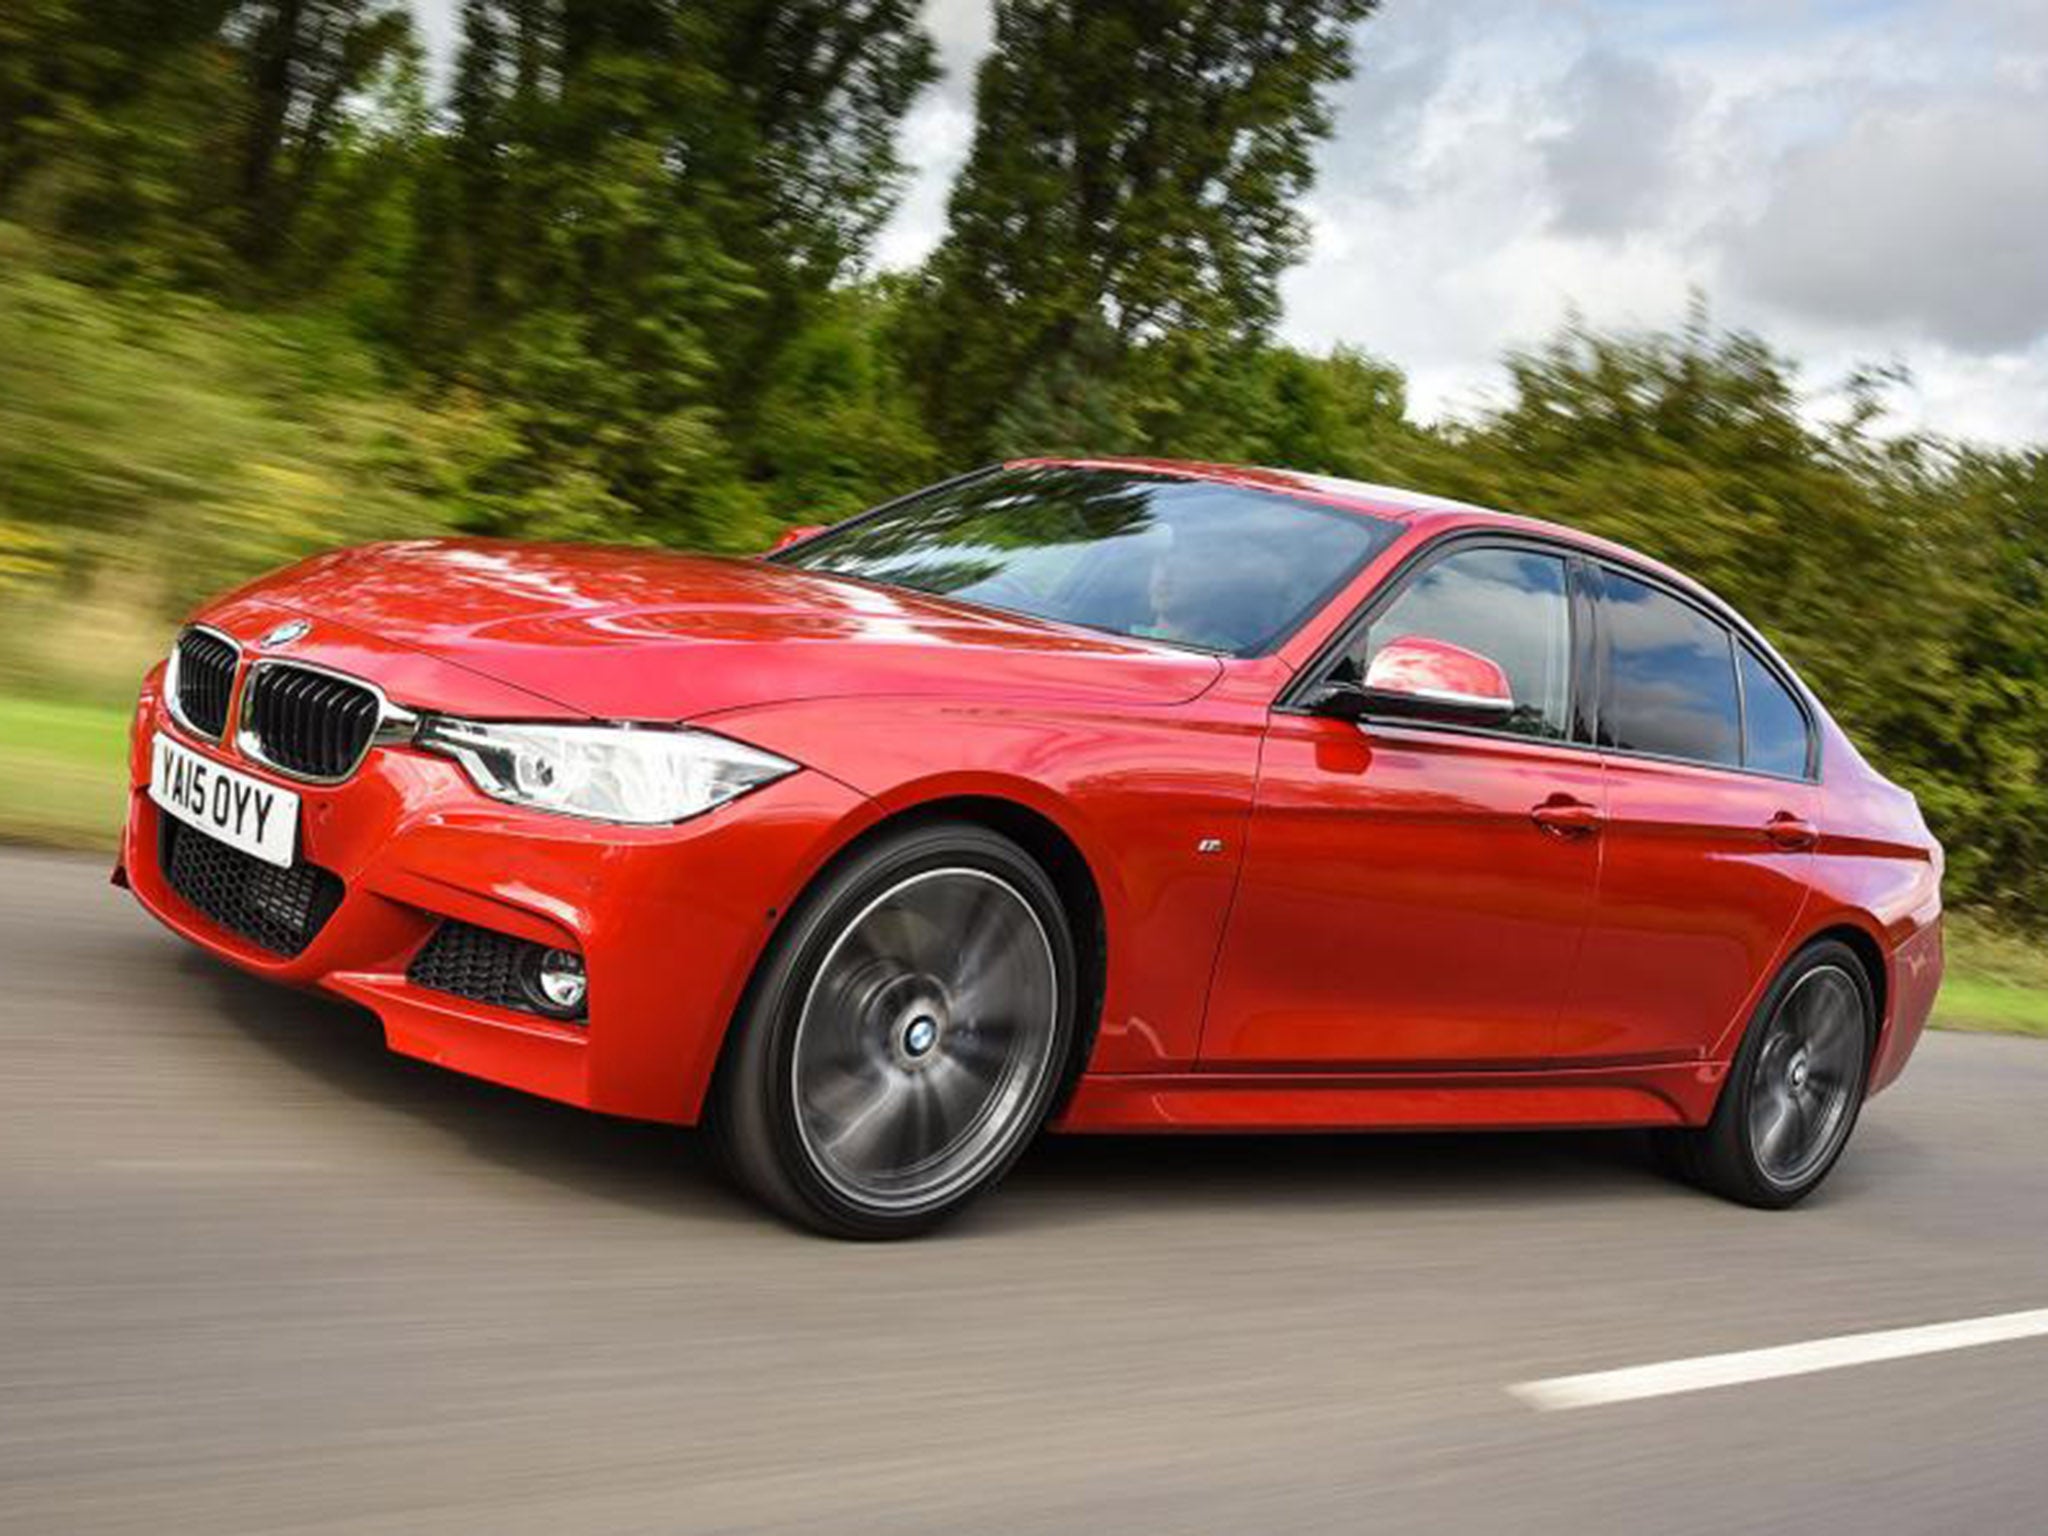 tunge Afbrydelse Transcend 2015 BMW 320d M Sport saloon, motoring review: Exec saloon gets facelift to  keep it at top of its game | The Independent | The Independent